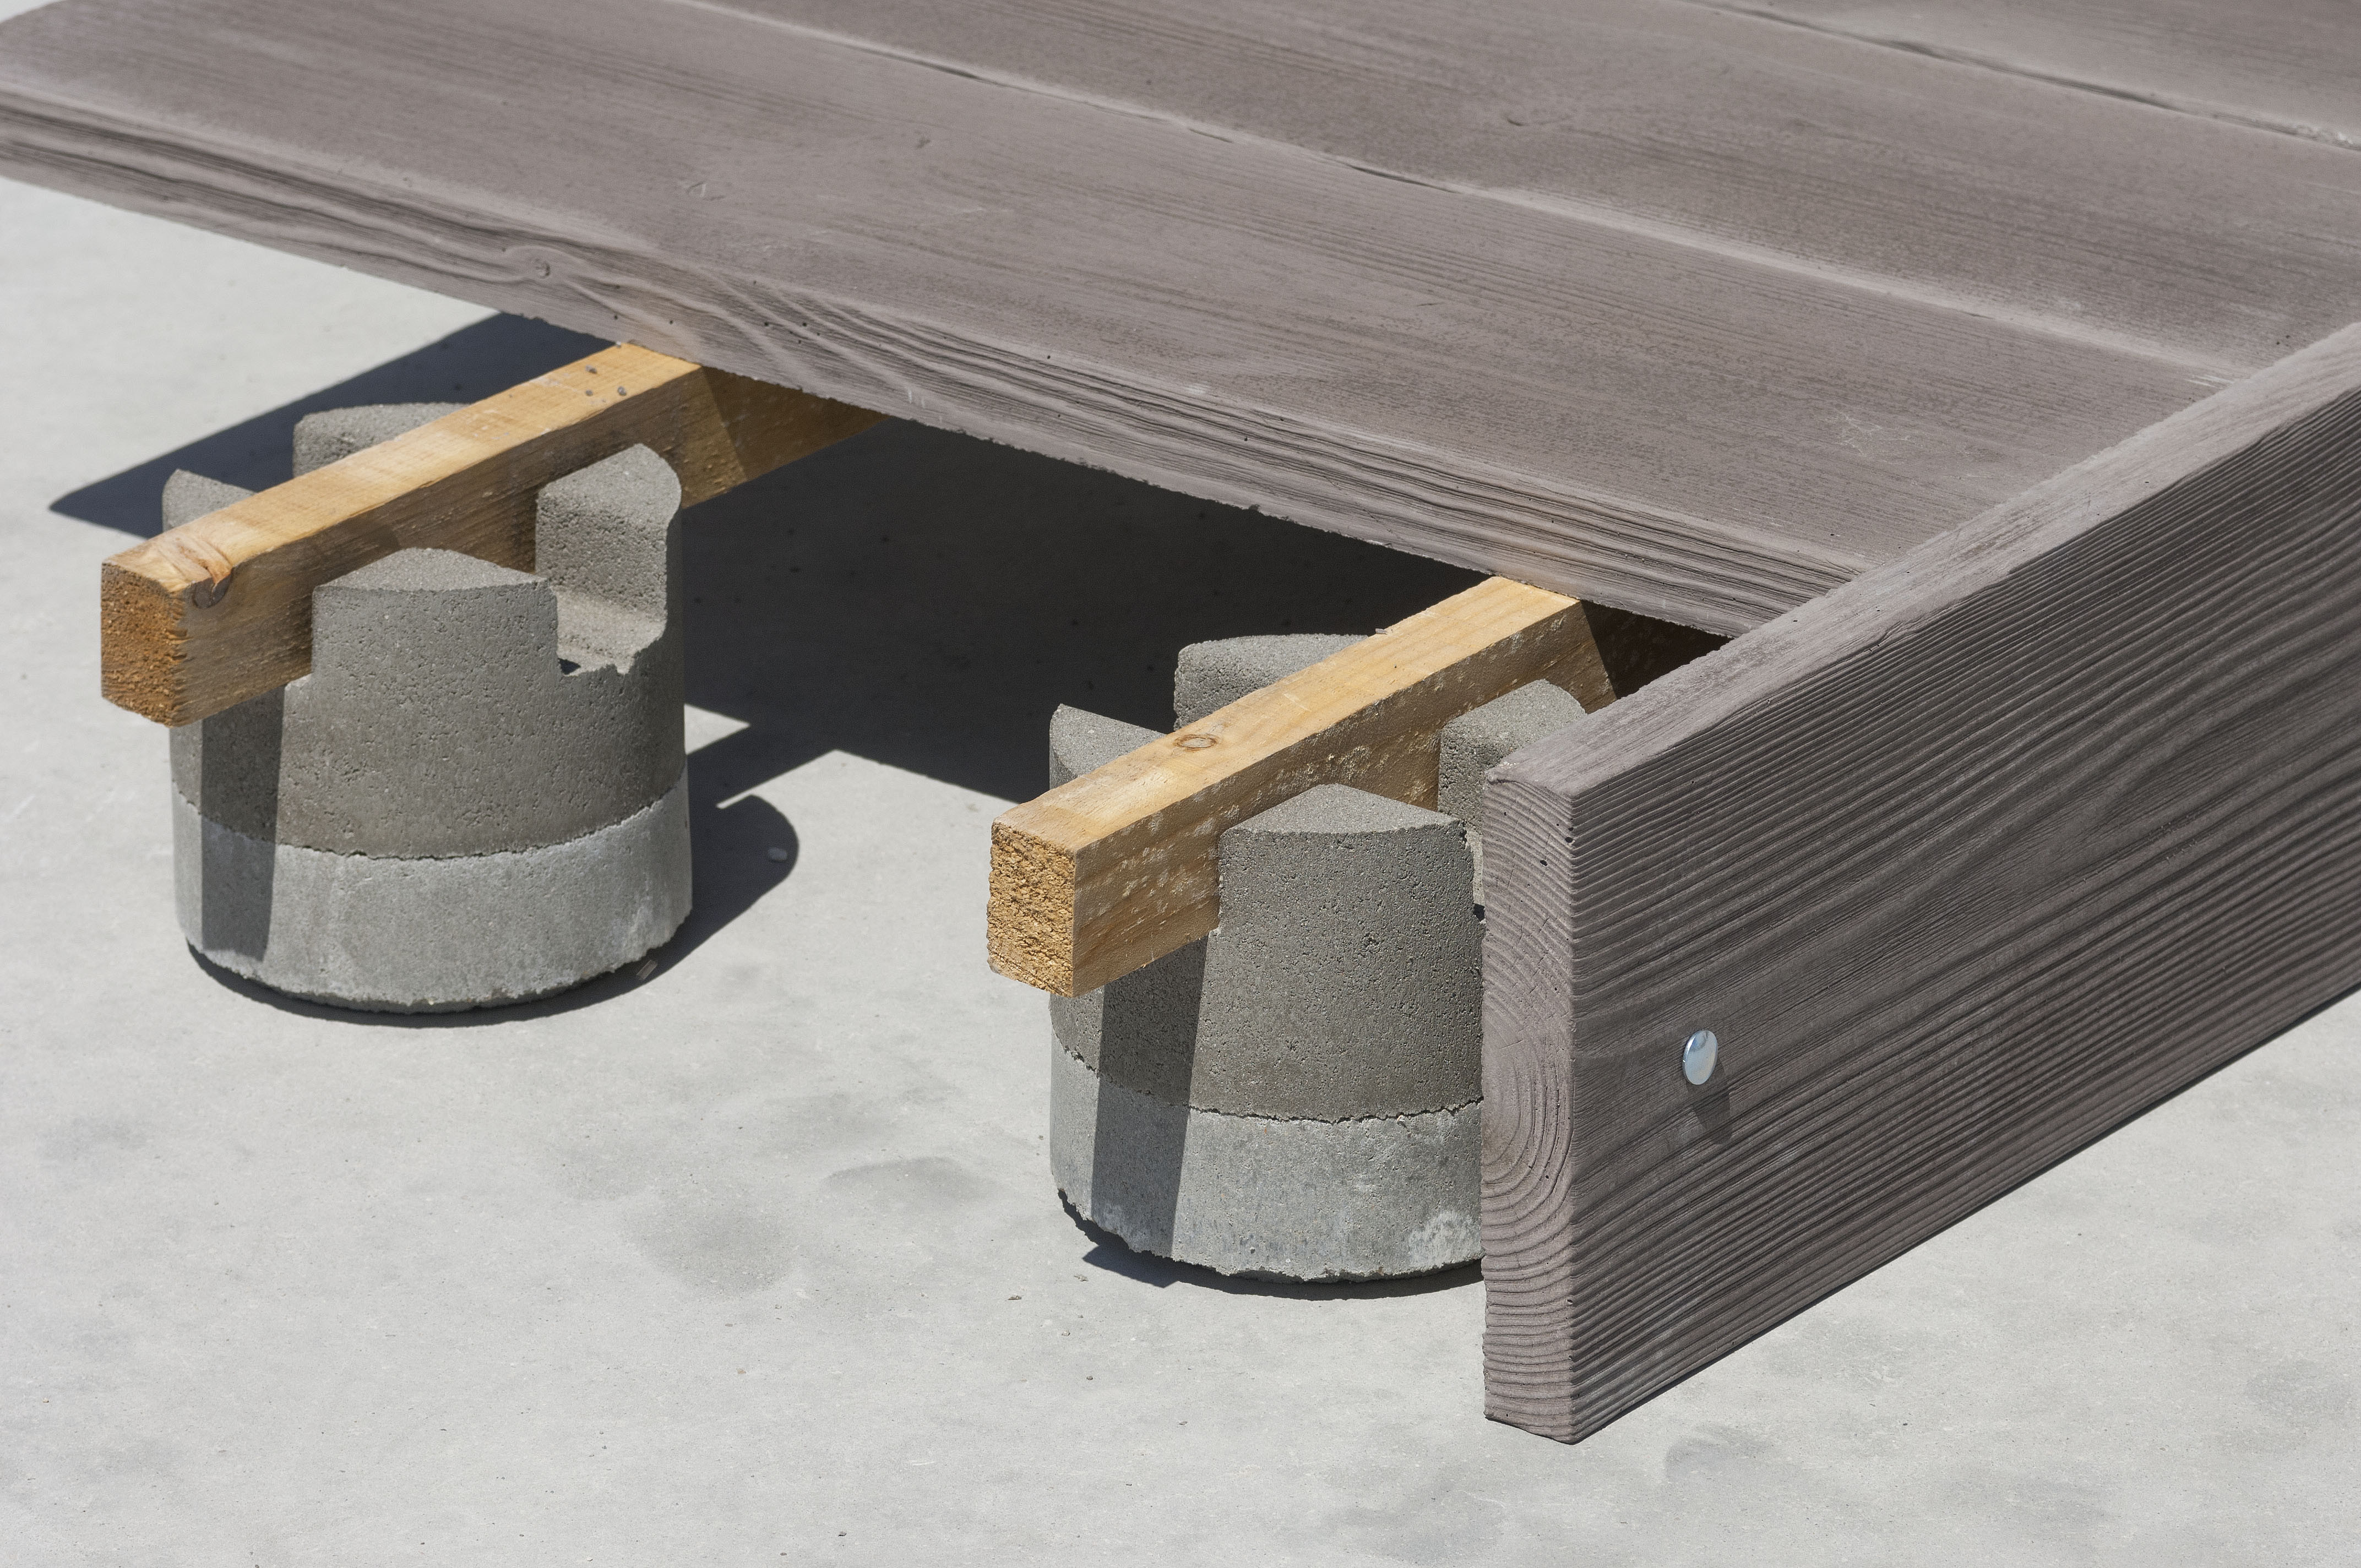 Concrete Supports for Outdoor Floorboards